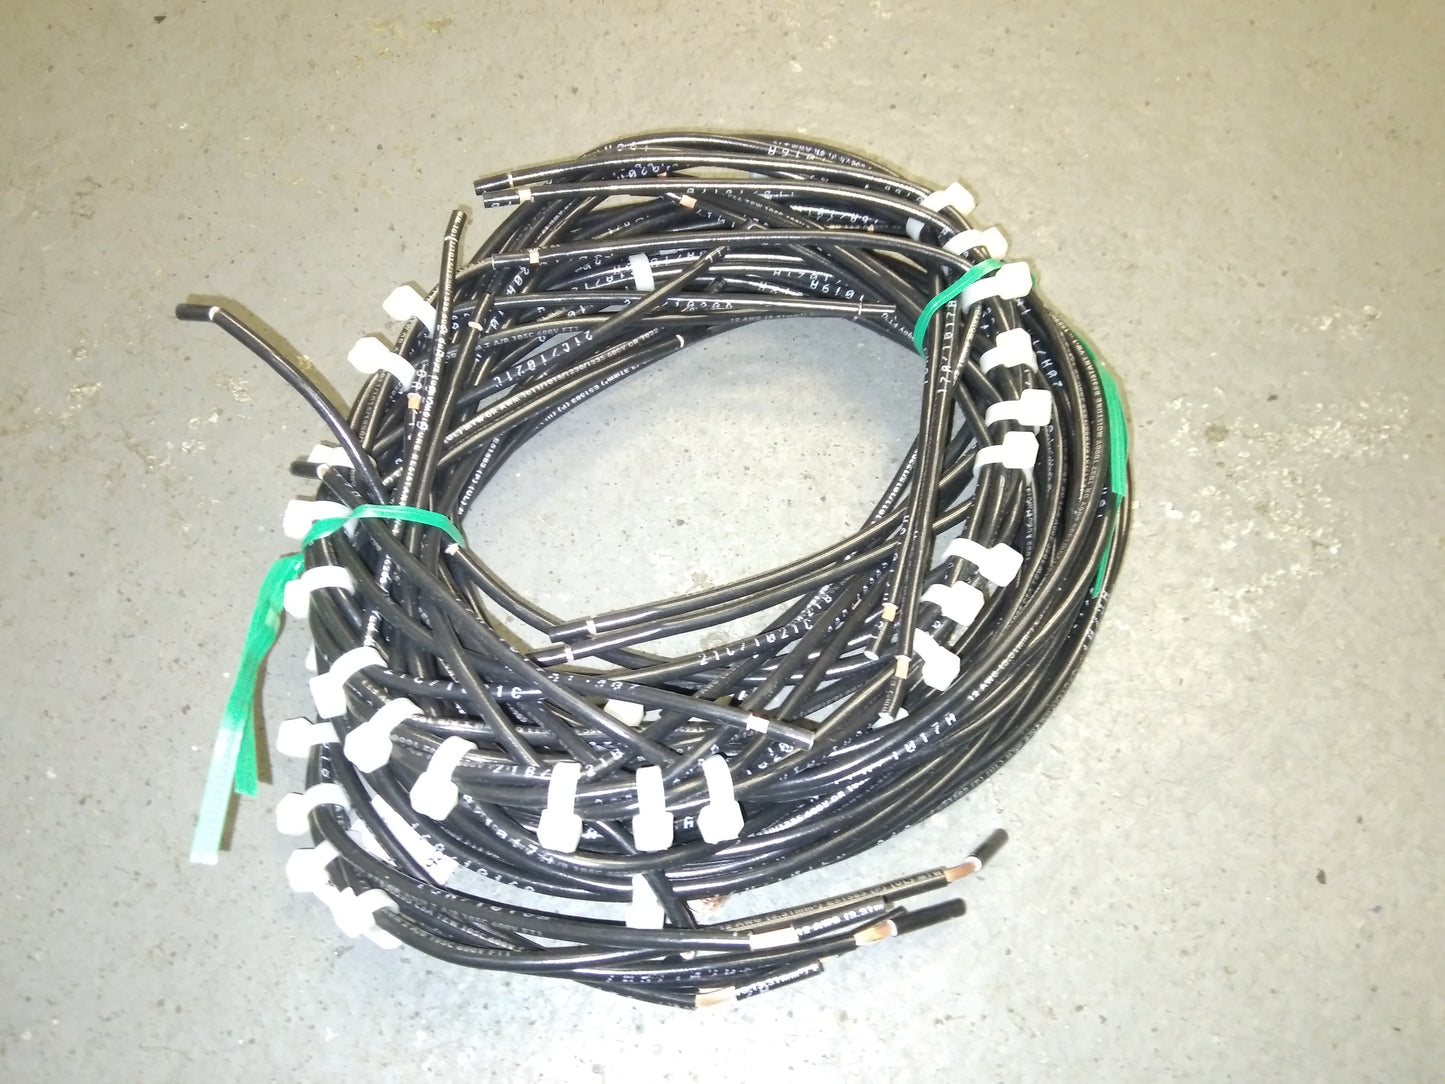 WIRING HARNESS FOR FAN CONTACTORS 